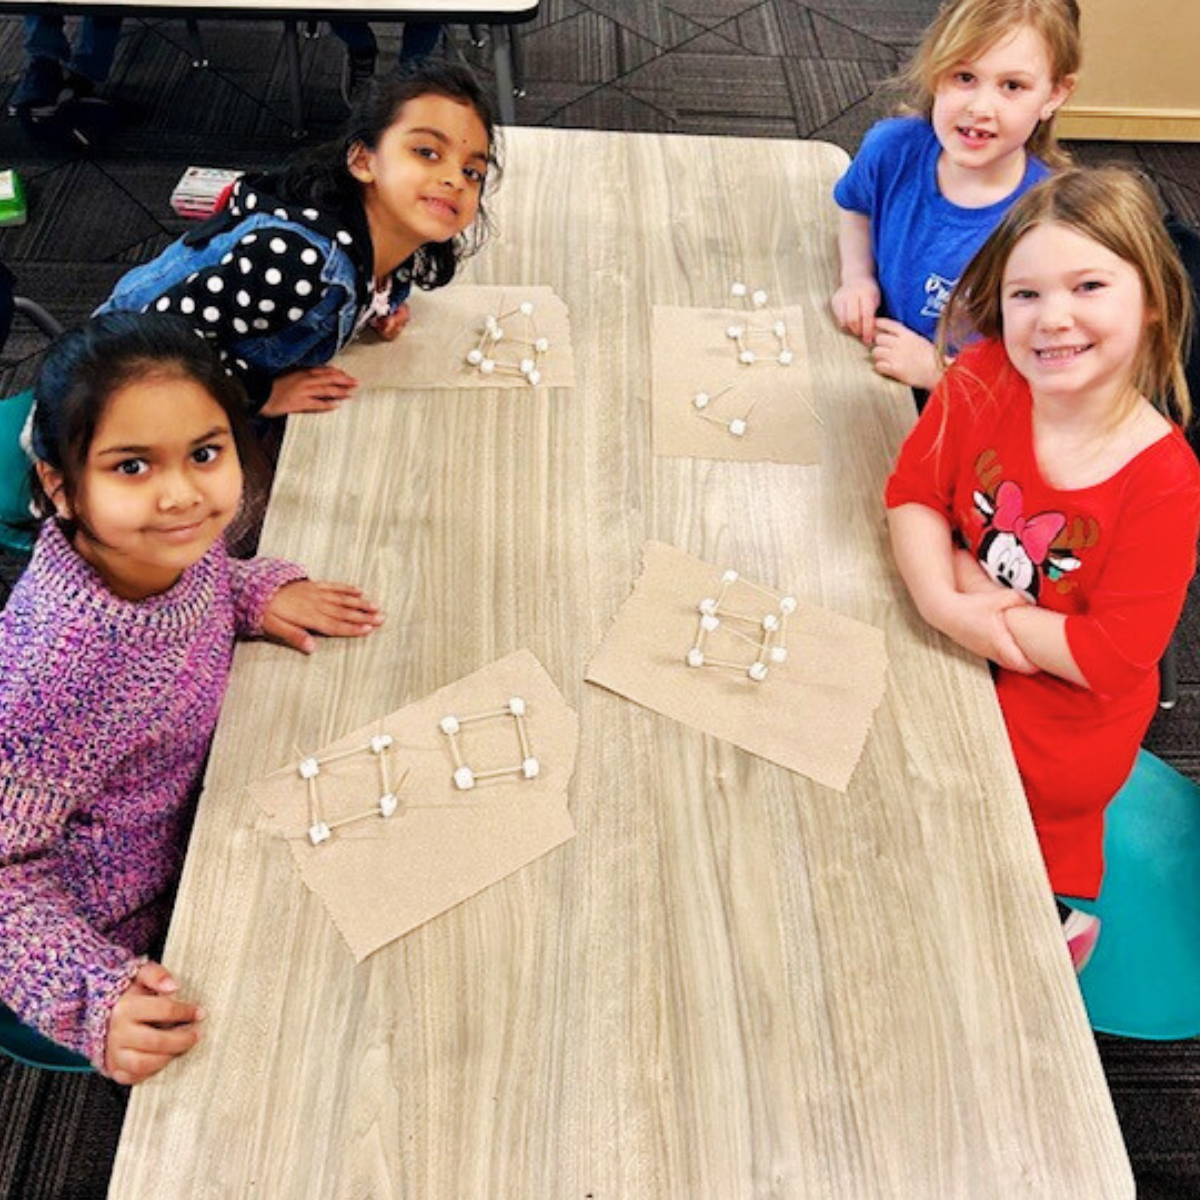 Students show off their 3D models made with marshmallows and noodles.